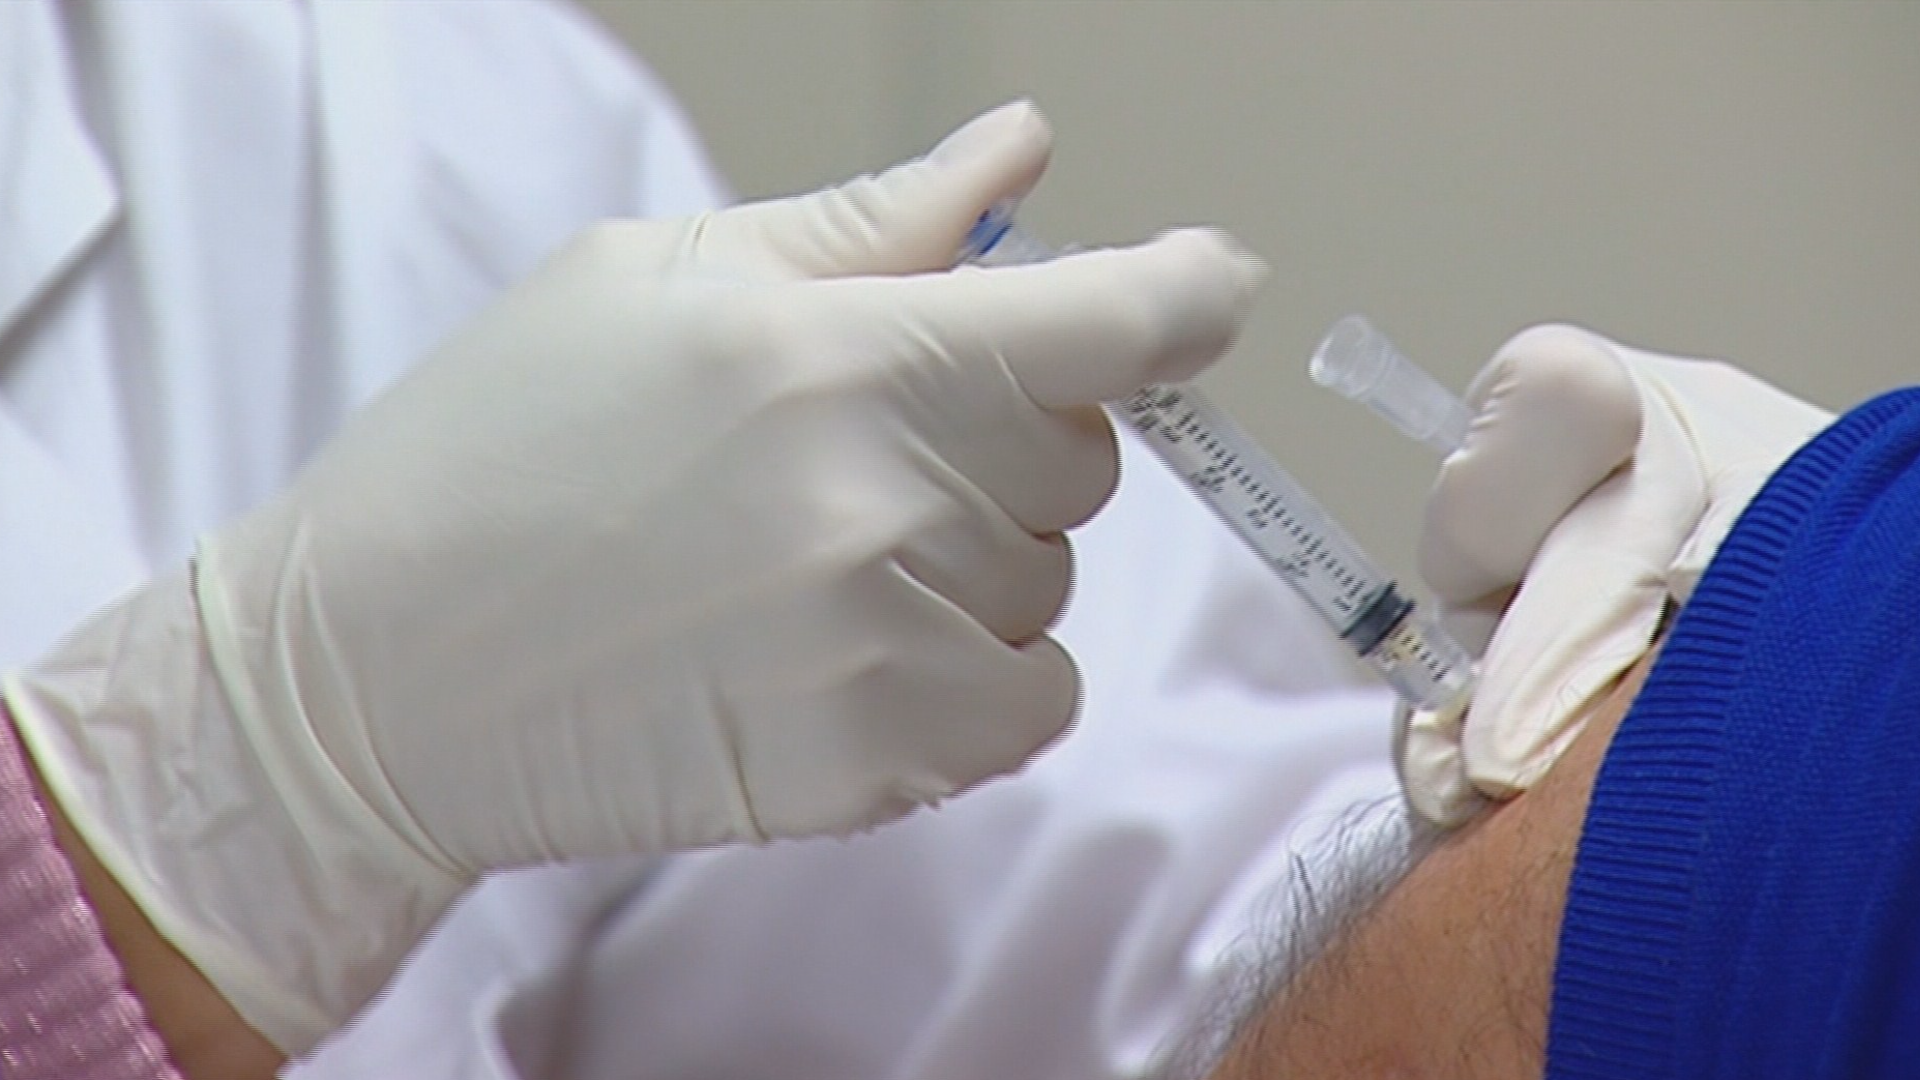 Will your insurance cover the COVID-19 vaccine? How much will it cost? Here's WFAA's Jay Wallis with  what you should expect if you decide to get the vaccine.